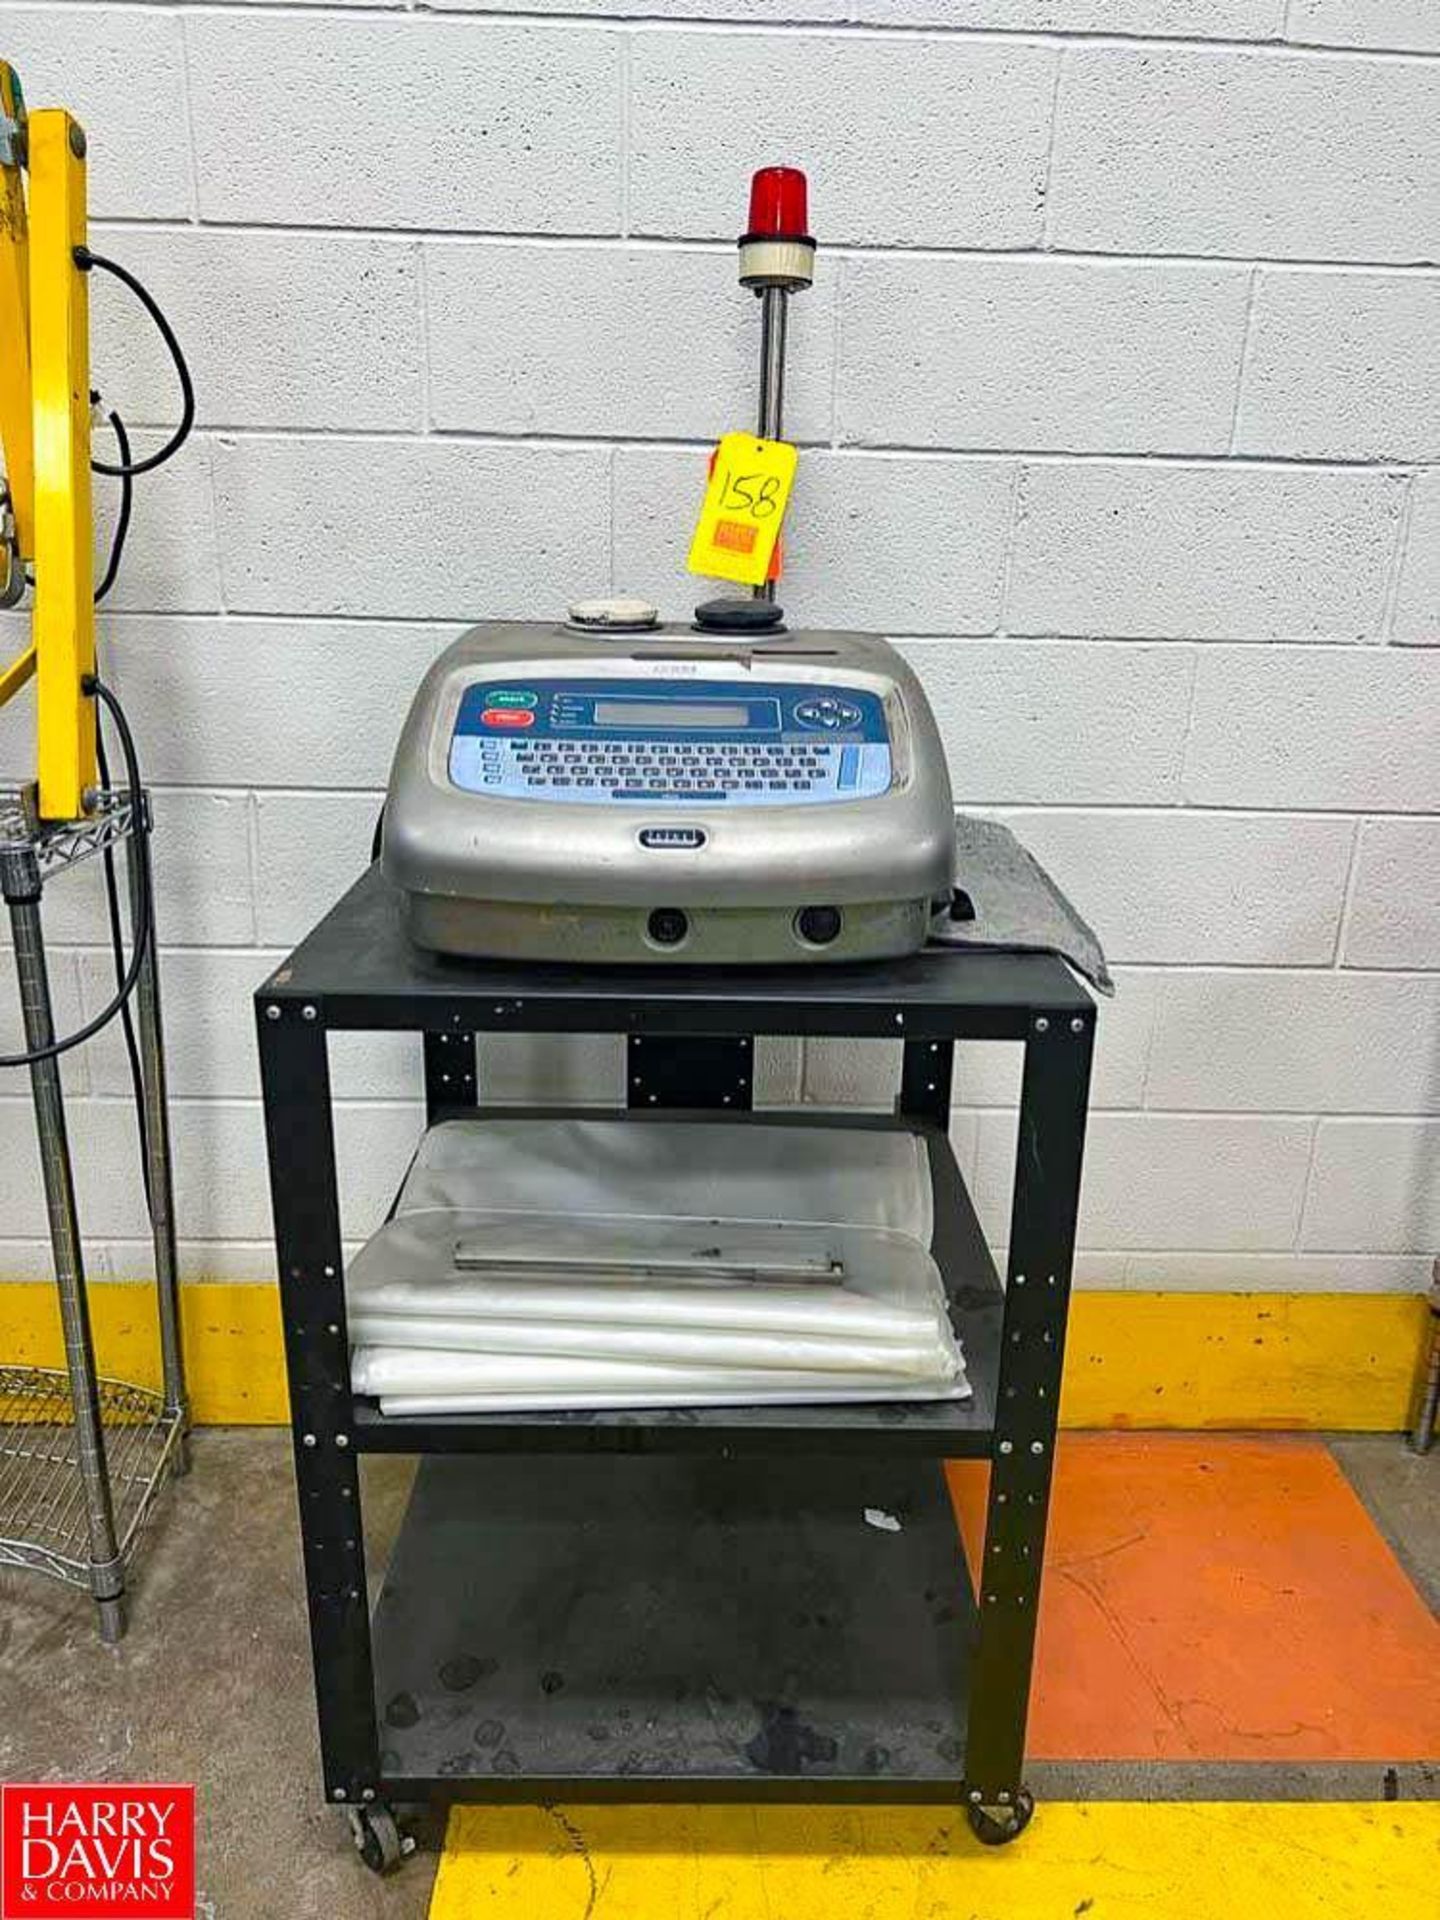 Linx Coder, Model: 4900, Mounted on Cart - Rigging Fee: $150